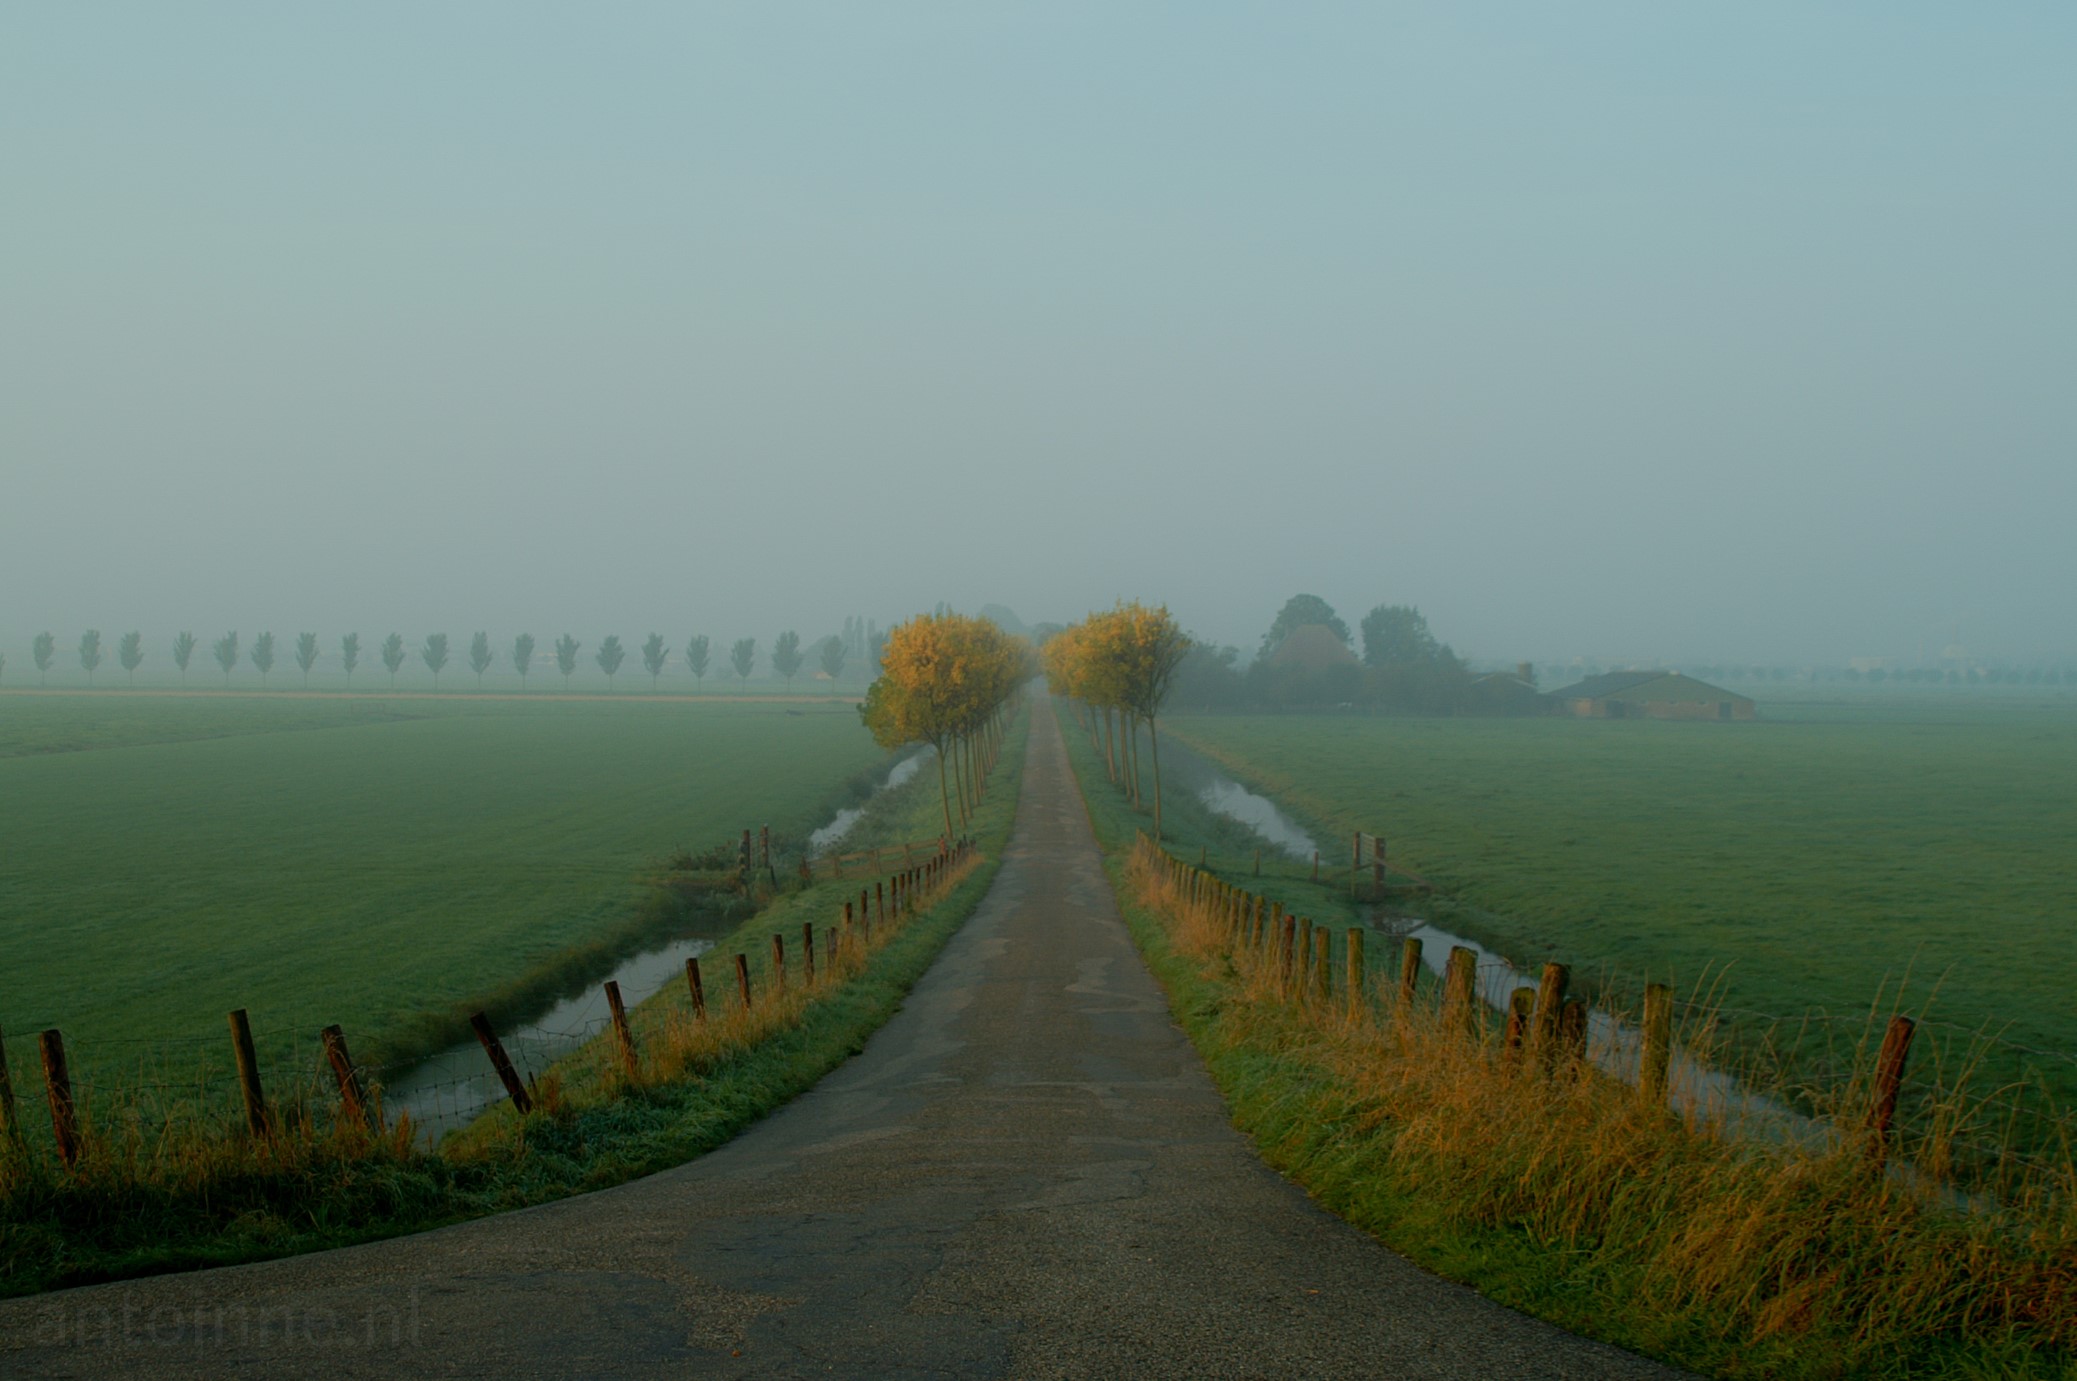 Polder landscape (West-Friesland). Early morning. You are standing on top of a dike, looking down on a foggy polder road. The tops of the trees along the road are highlighted by the rising sun. Far away on the left horizon is another road lined with trees. A farmhouse can be seen on the right. You stay a little longer to enjoy the scenery.